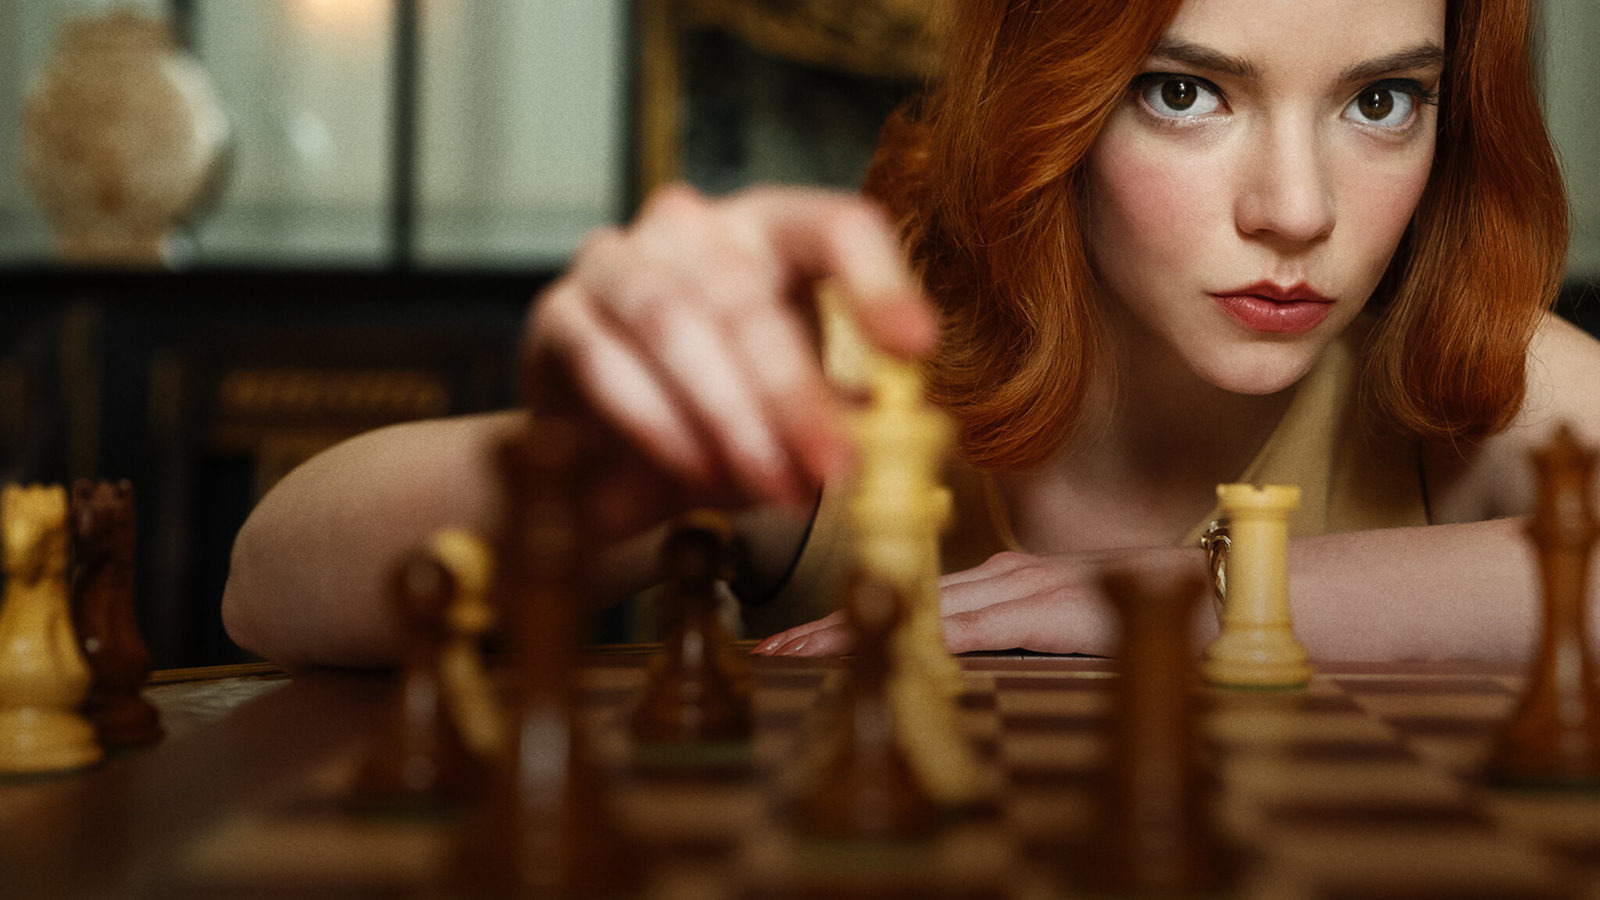 The Queen's Gambit Season 2 - Updates on Release Date, Cast, Plot, and More!